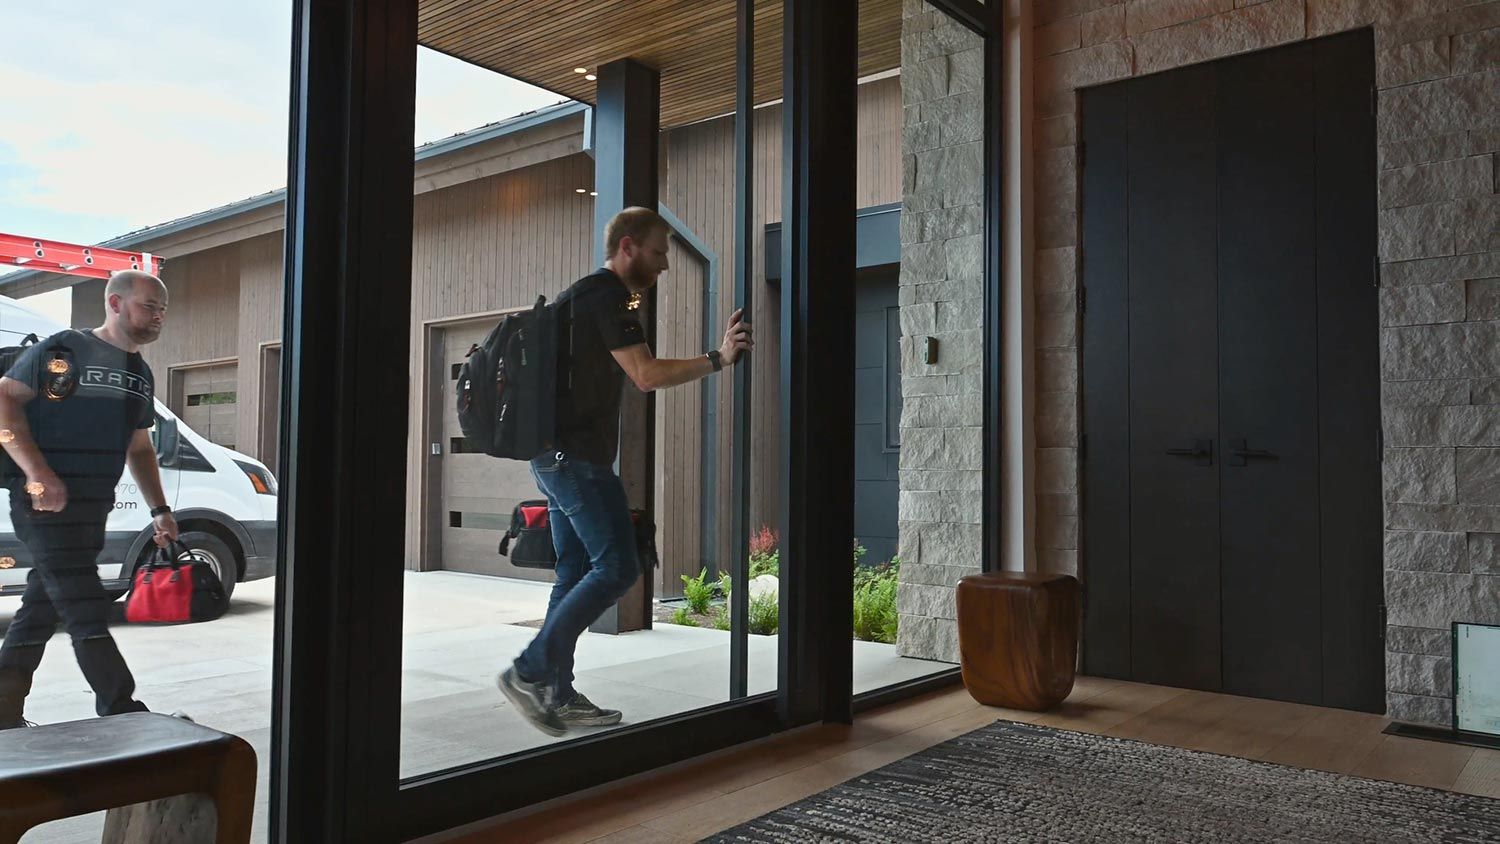 Two men carrying backpacks and a tool bag enter a modern home through a large glass door, with a white van parked outside.